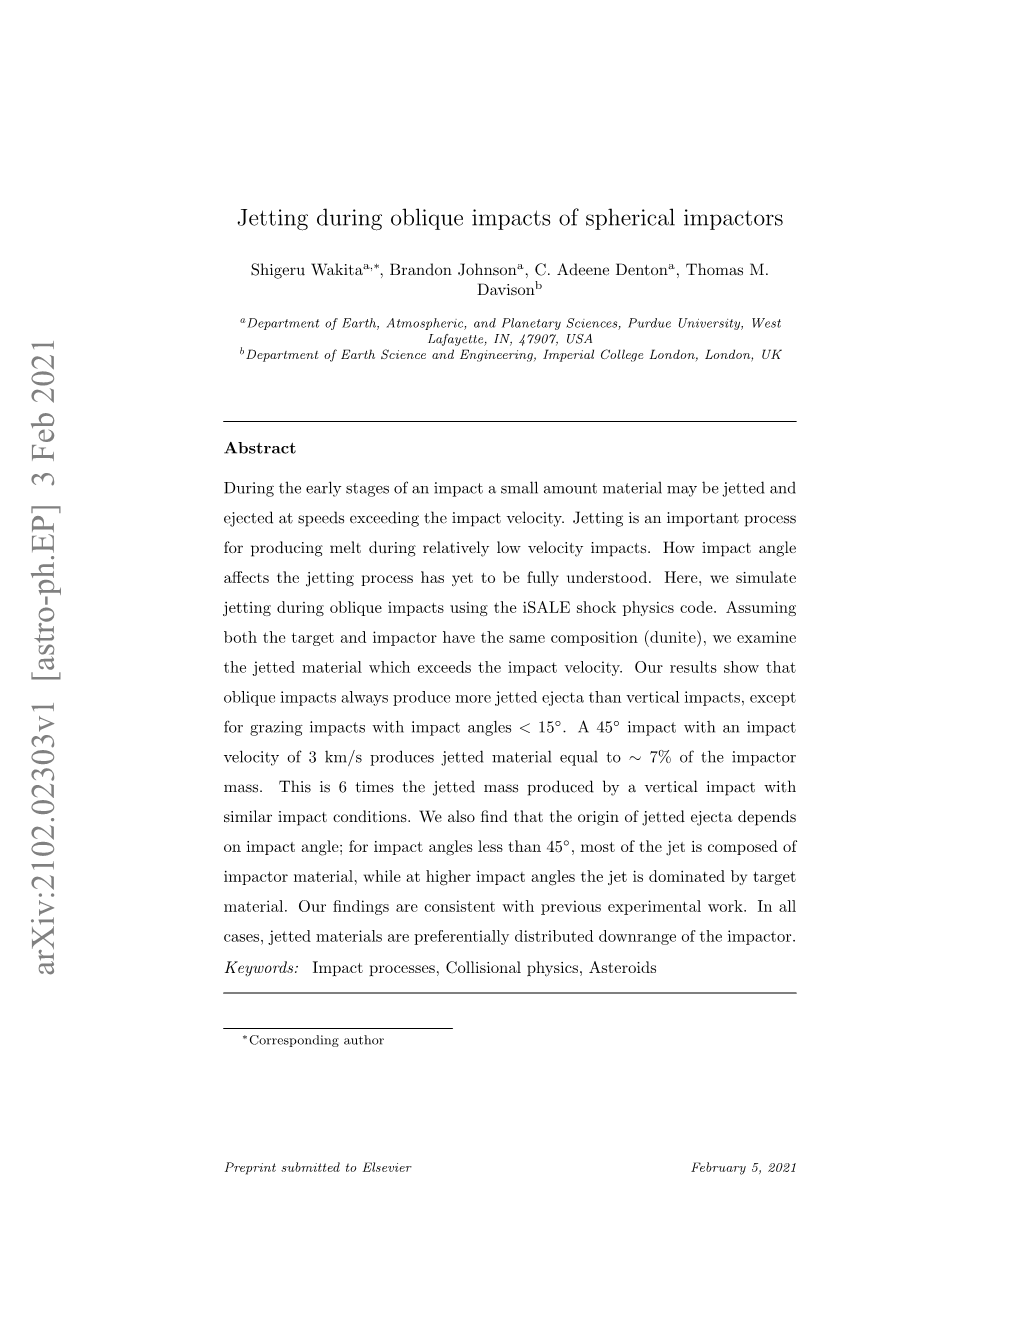 Jetting During Oblique Impacts of Spherical Impactors